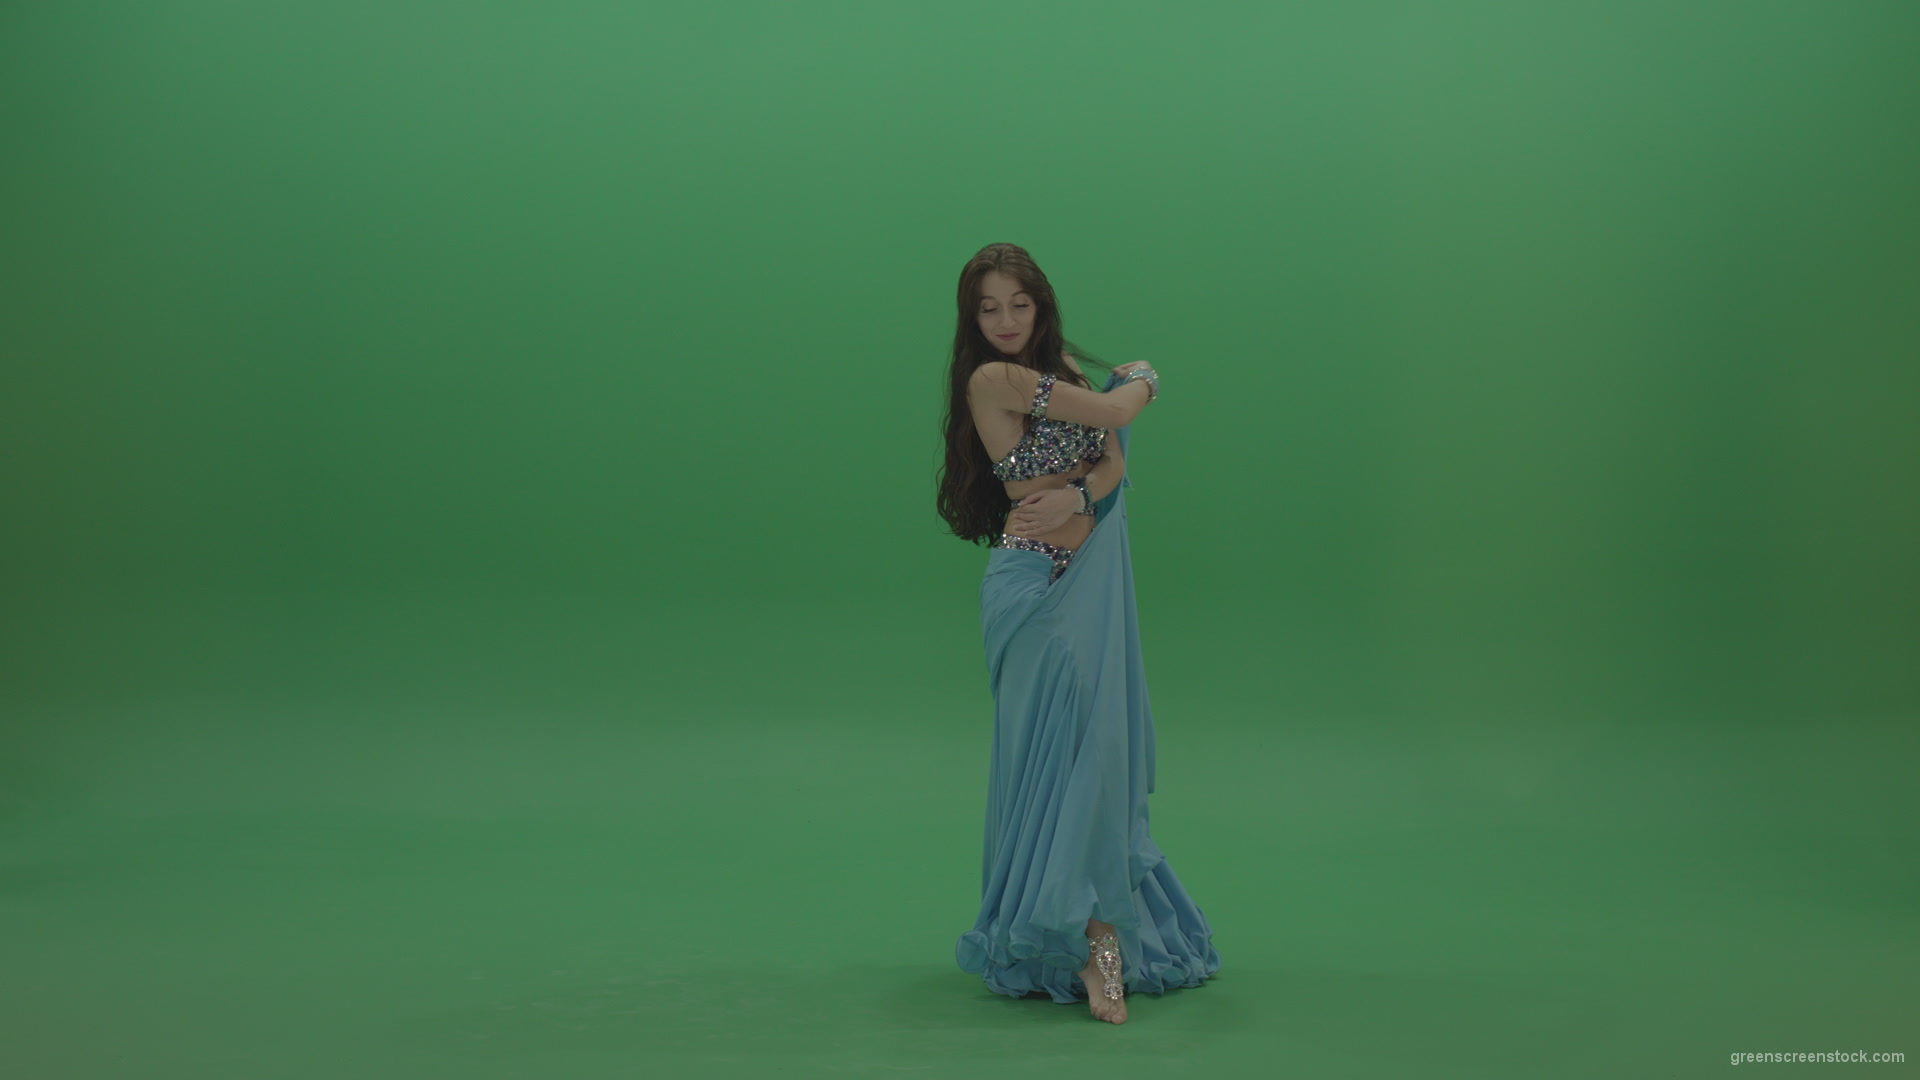 Fair-belly-dancer-in-blue-wear-display-amazing-dance-moves-over-chromakey-background_002 Green Screen Stock